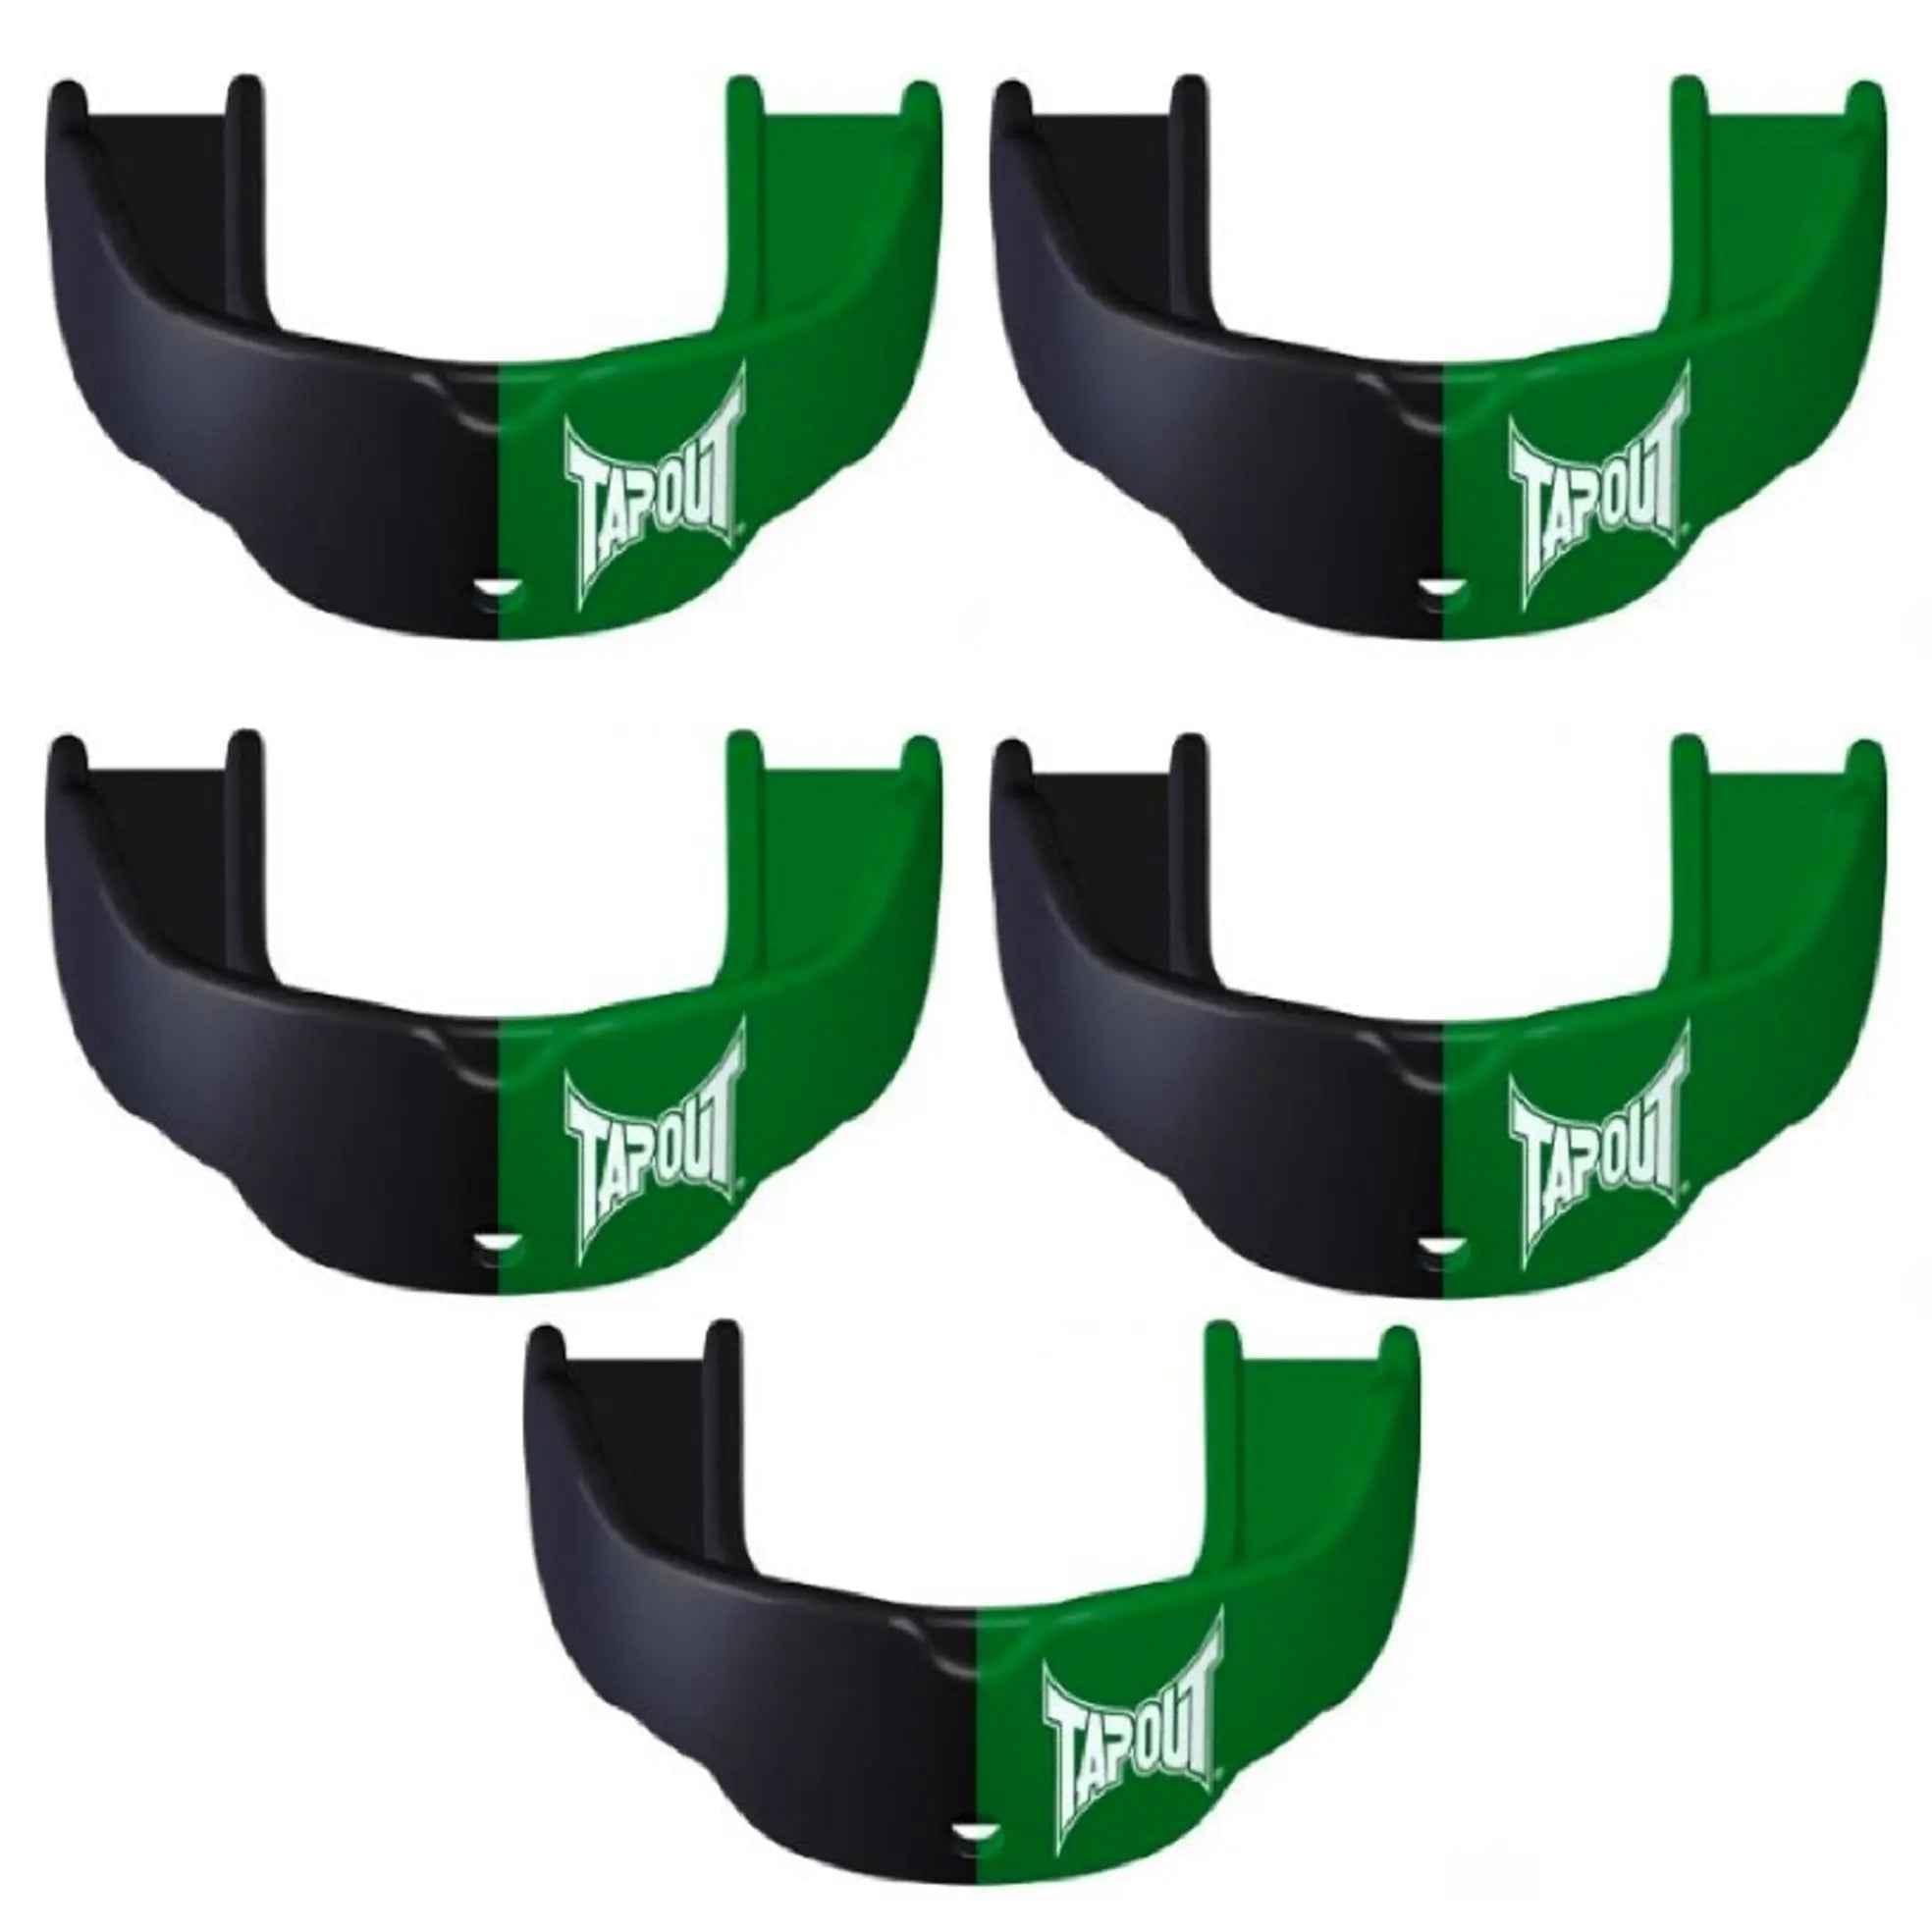 Tapout Youth Protective Sports Mouthguard with Strap 5-Pack - Green/Black Tapout